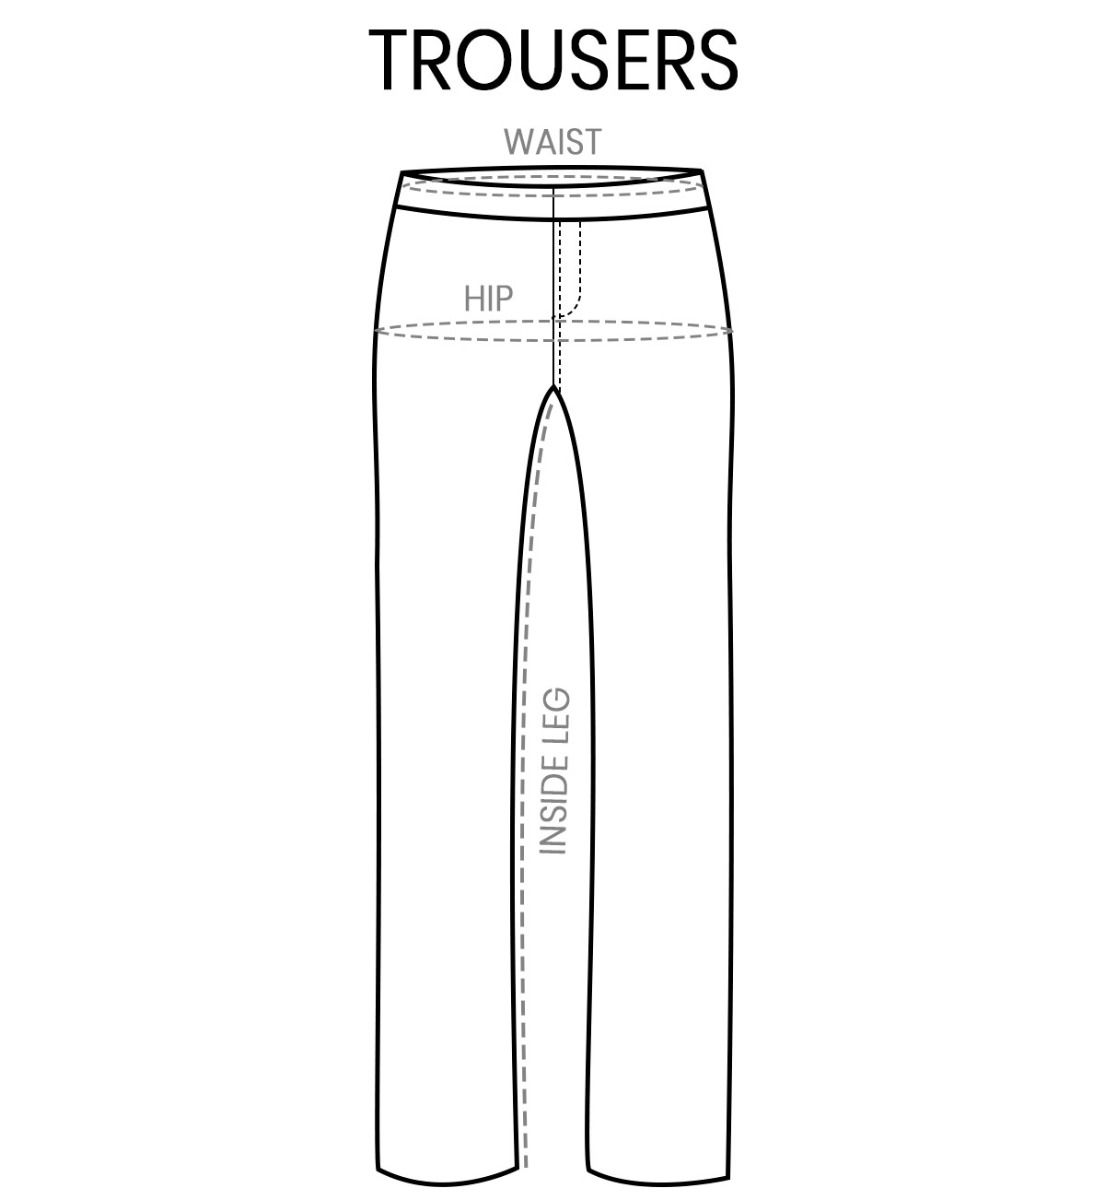 Trousers Measurement Guide